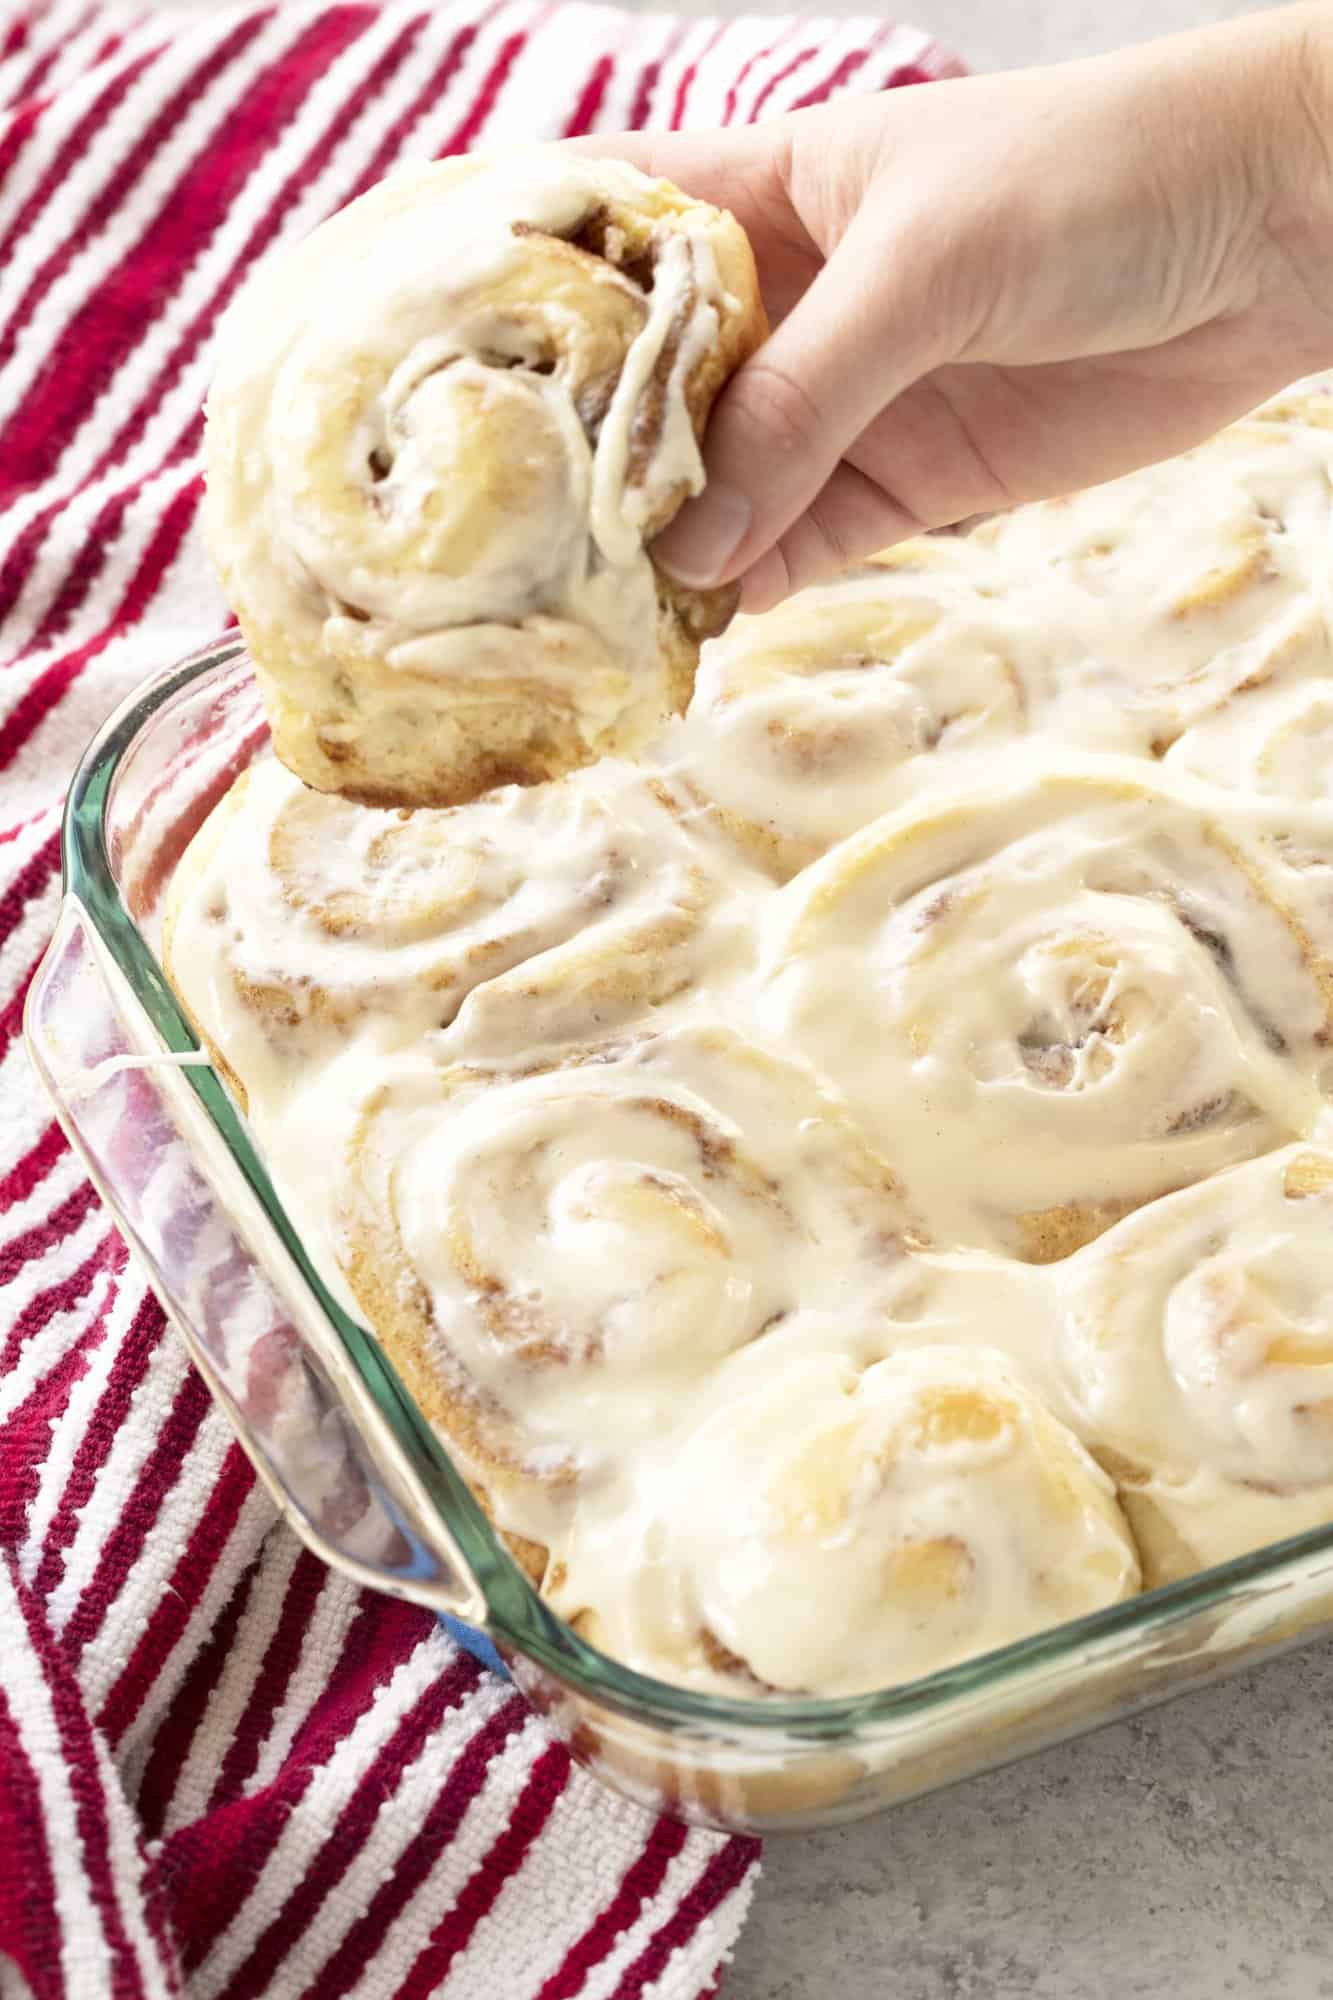 A Homemade glazed Cinnamon Roll is taken from the pan.